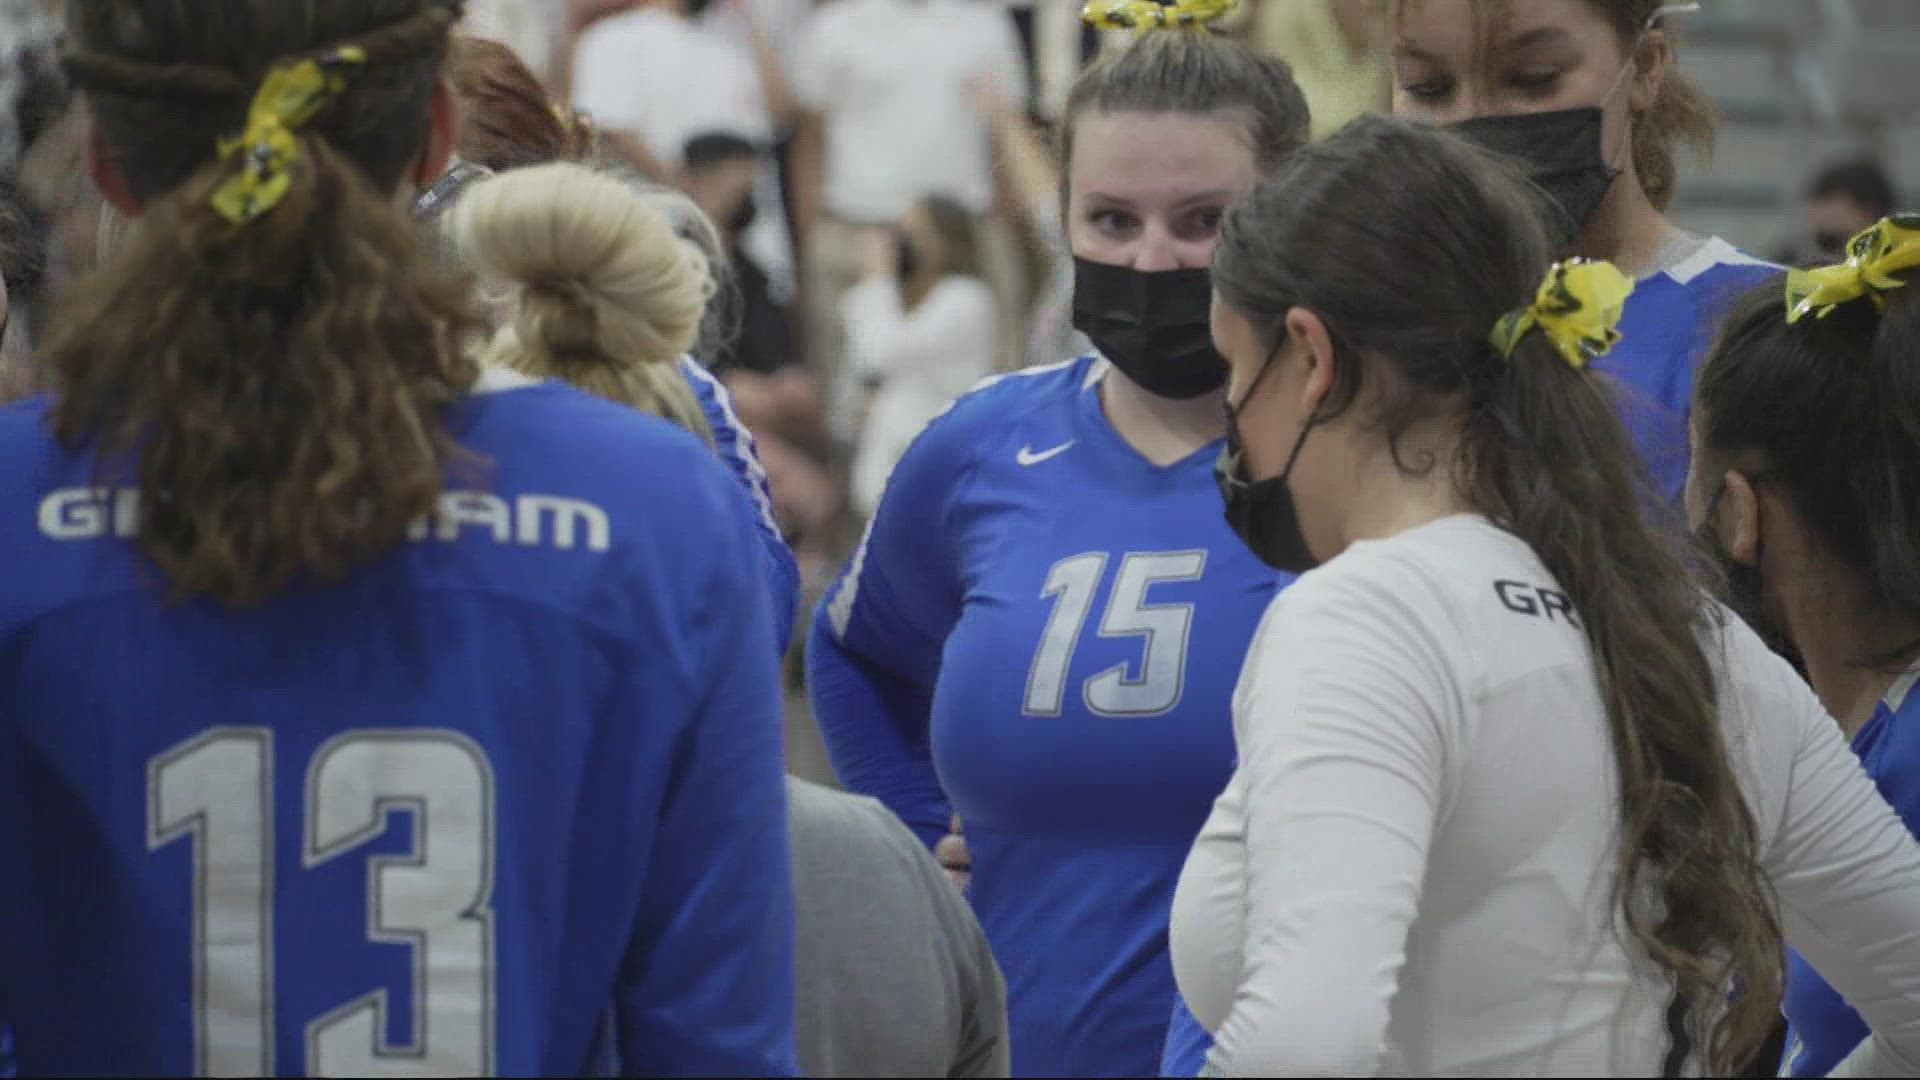 The county is asking schools to require volleyball players to wear masks during indoor practice and while they compete in games.